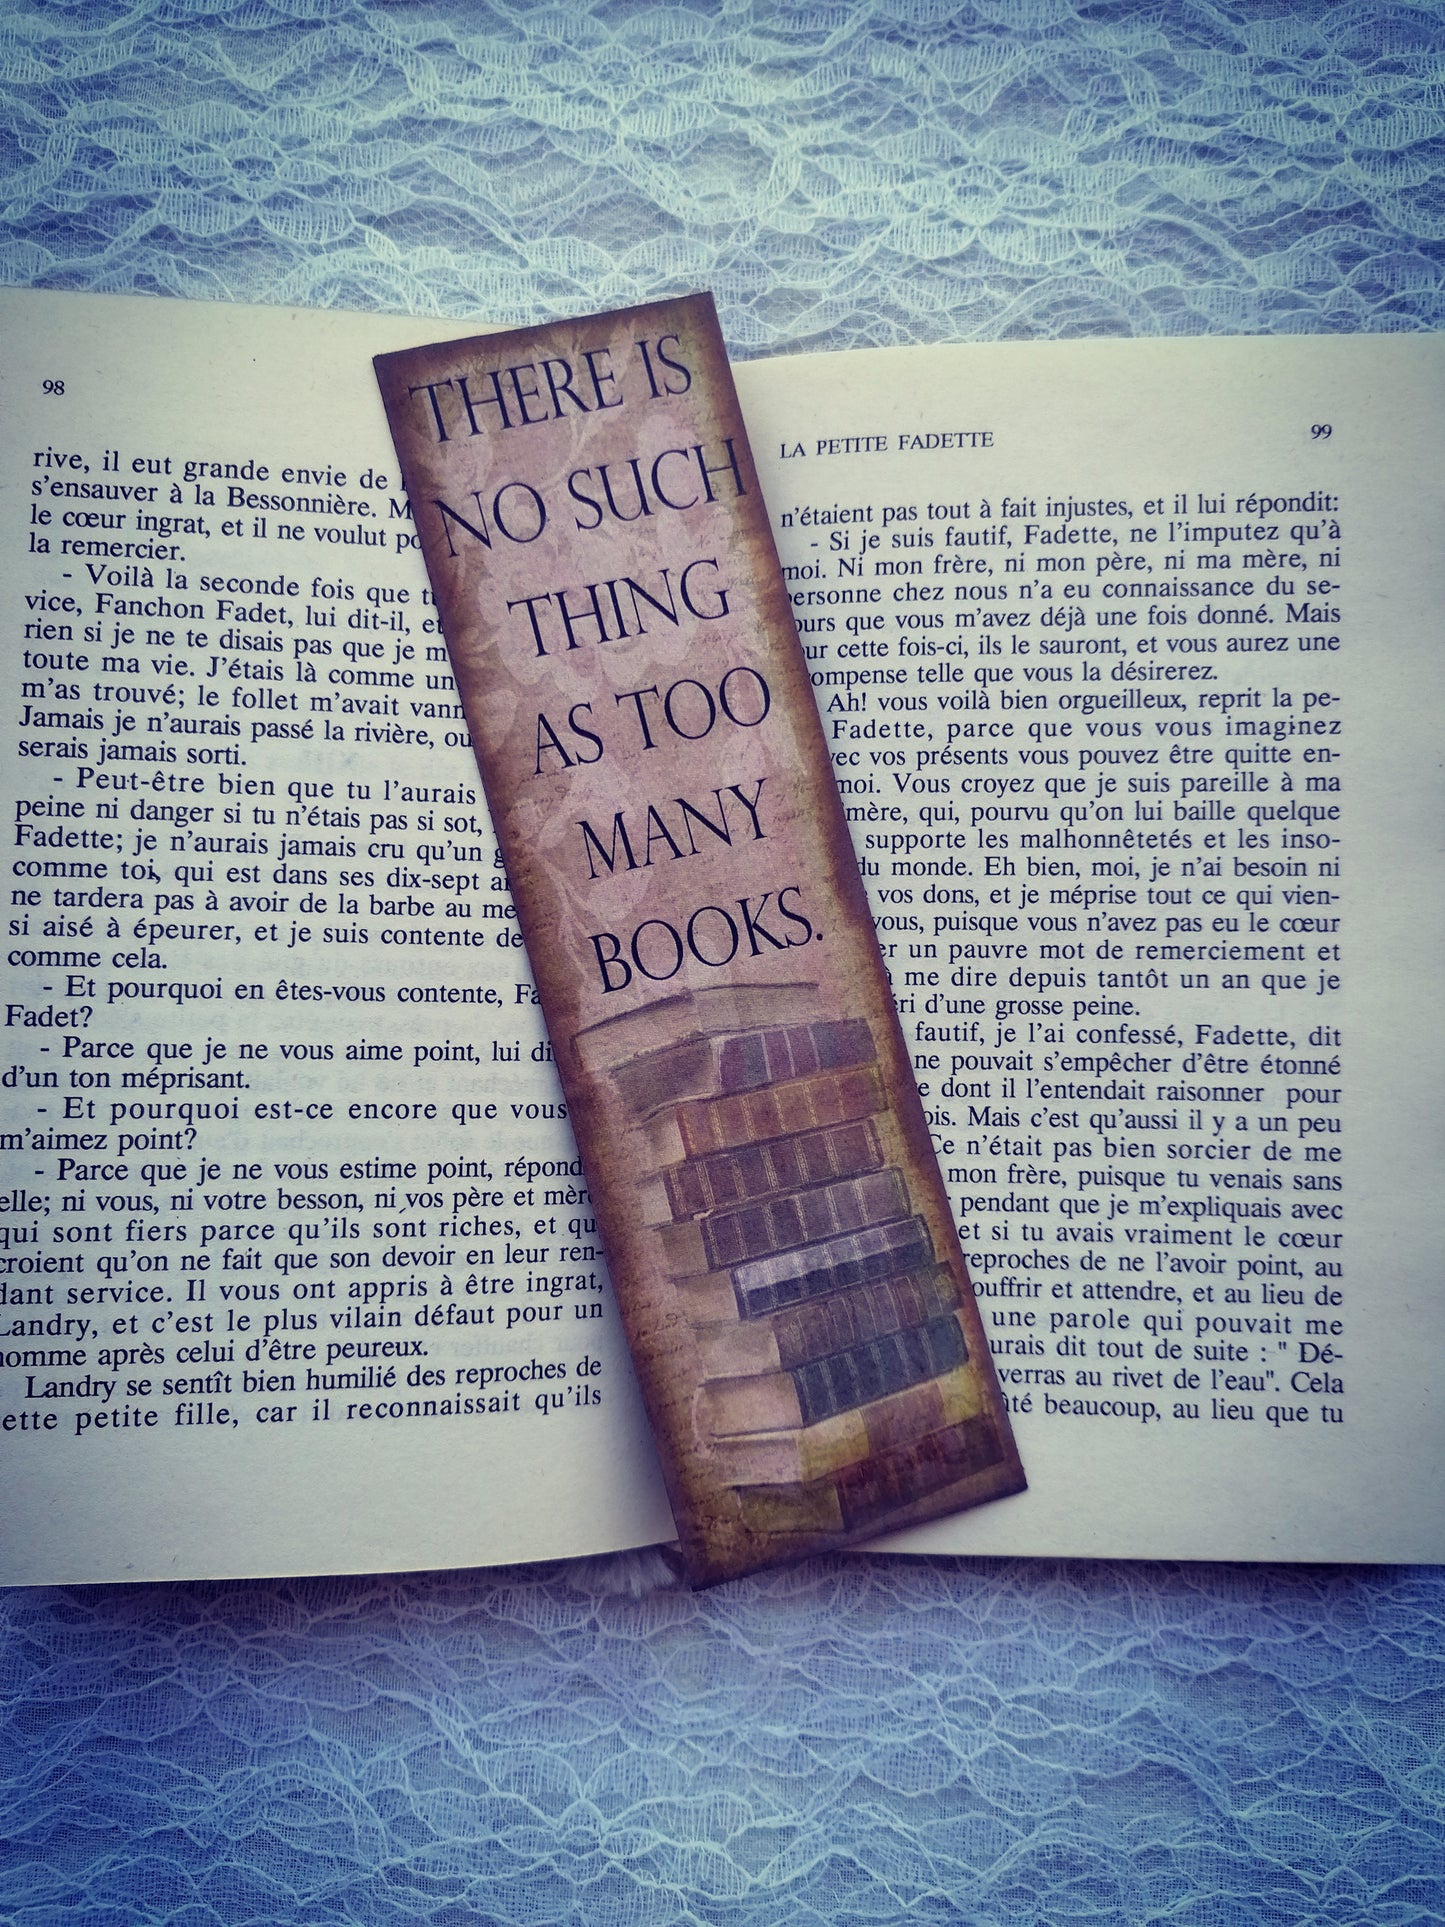 Semn de Carte Vintage ”There is no such thing as too many books”